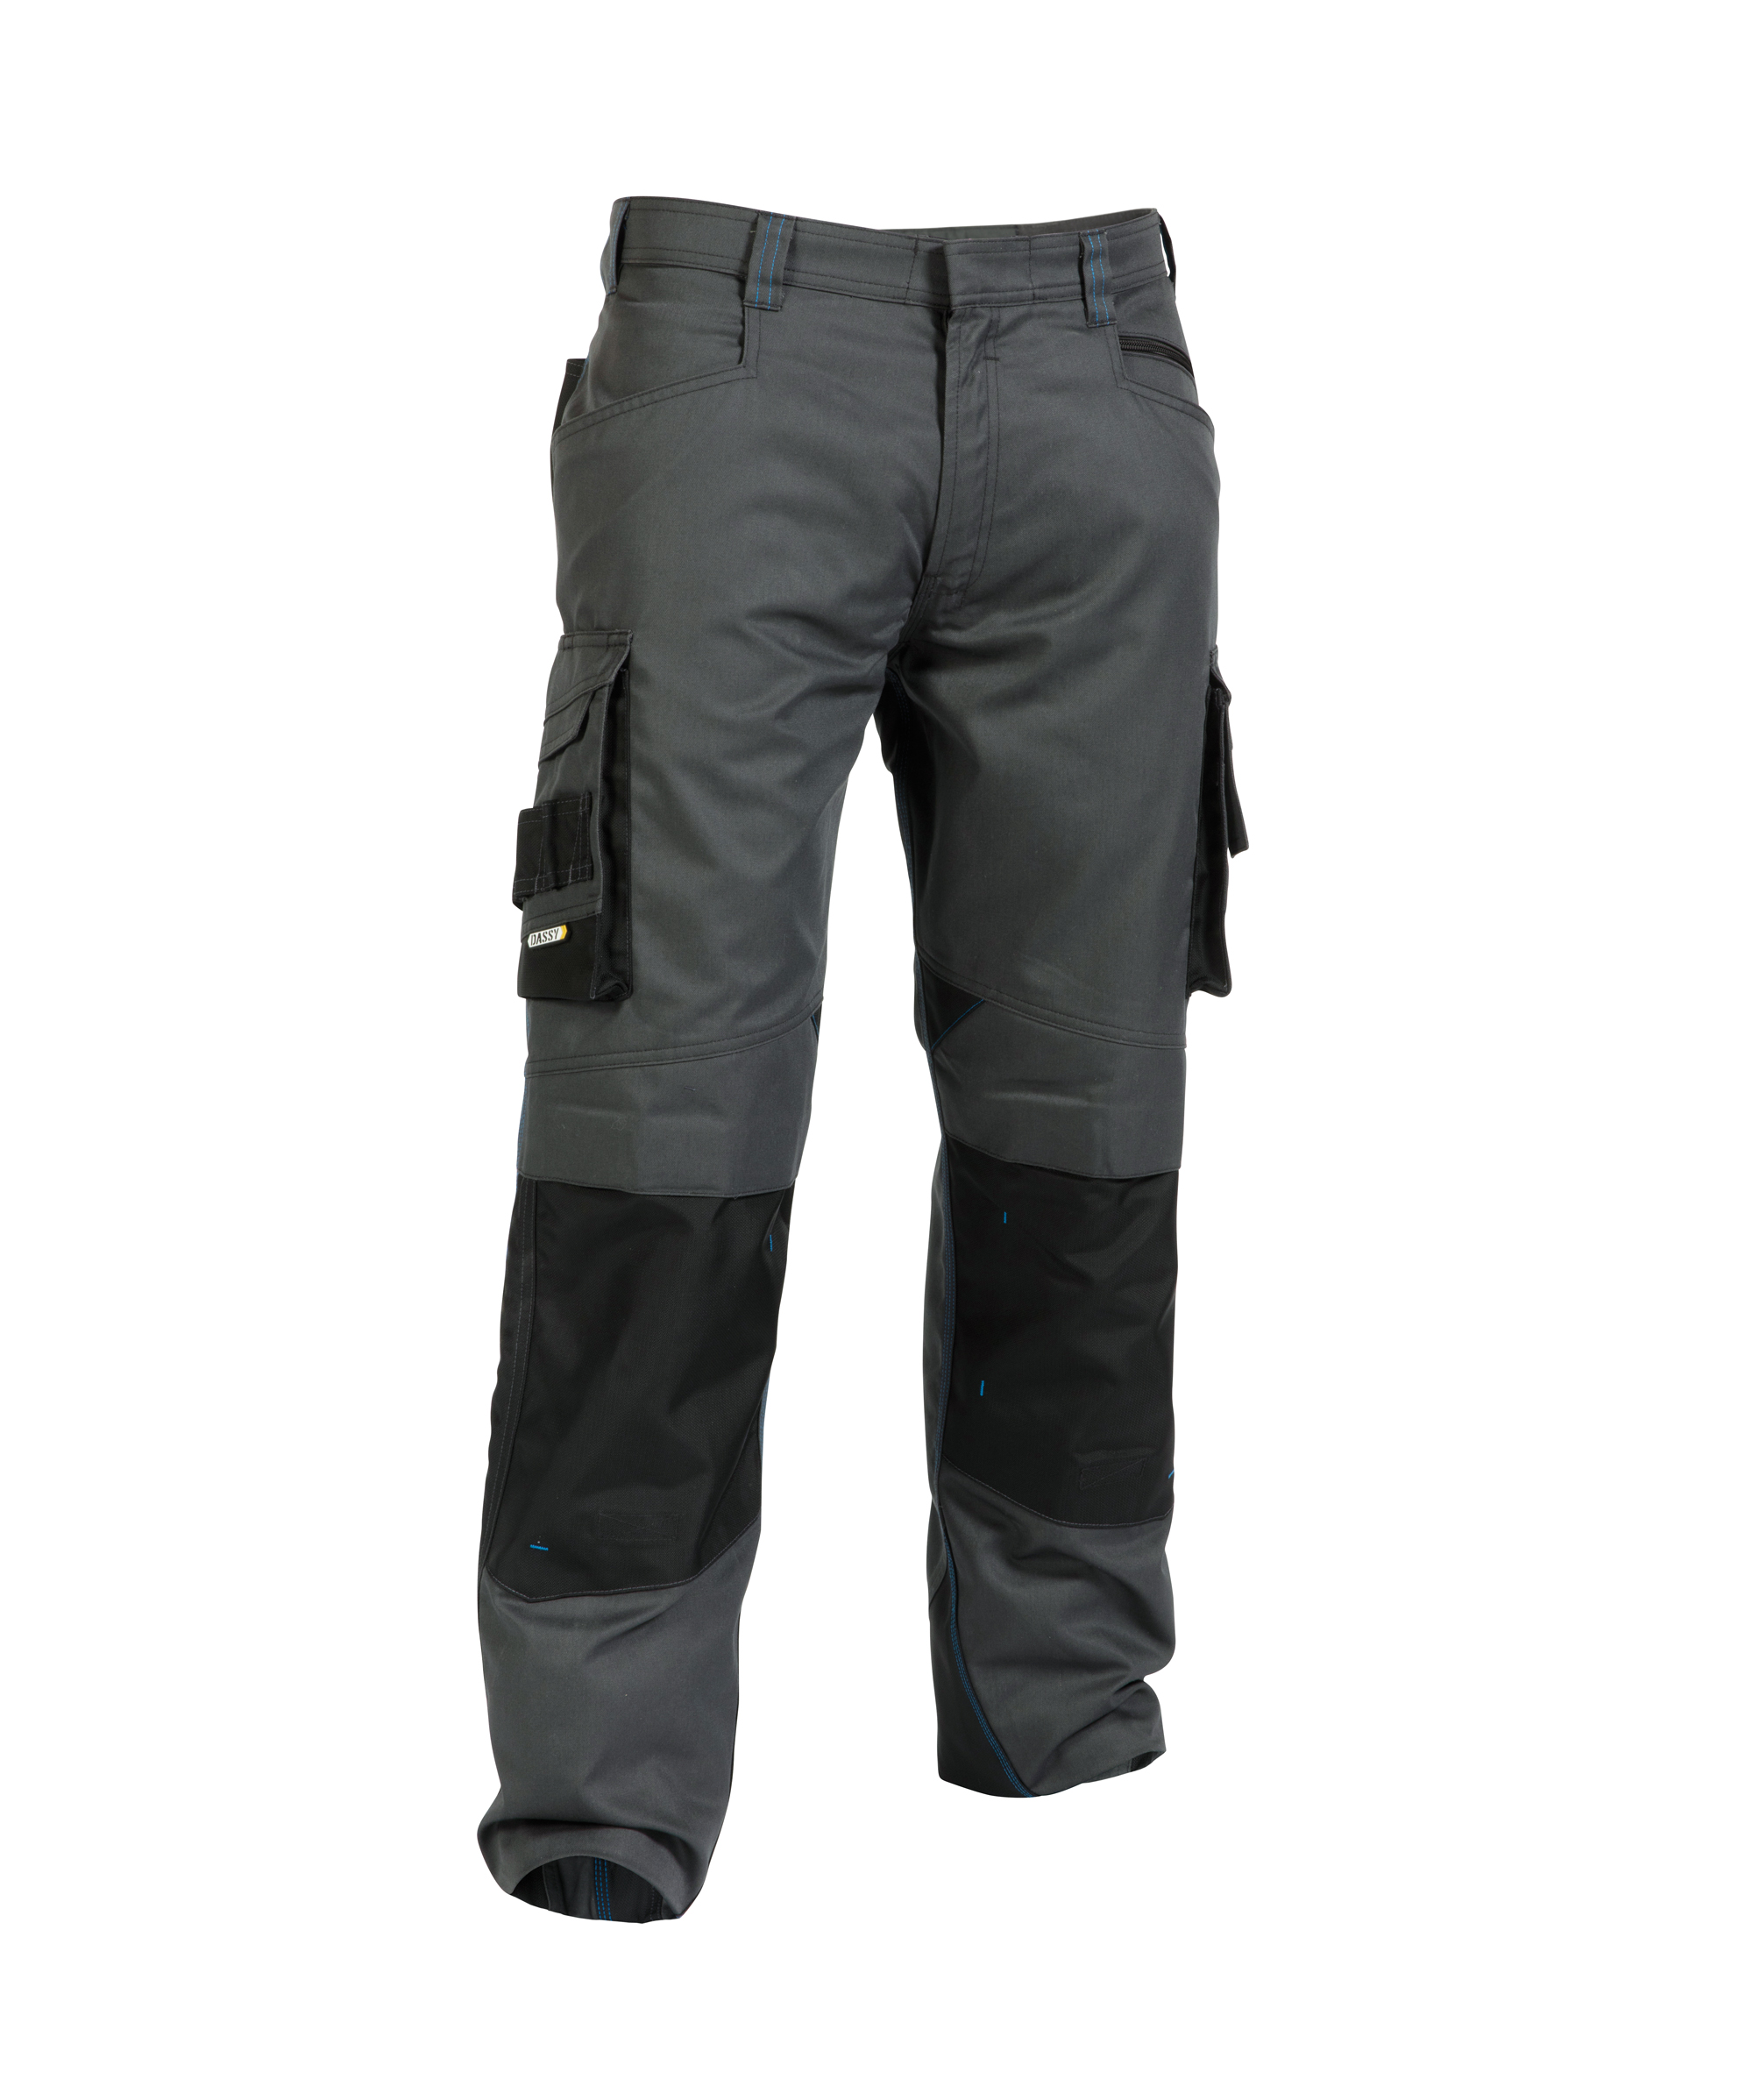 nova_two-tone-work-trousers-with-knee-pockets_anthracite-grey-black_side.jpg